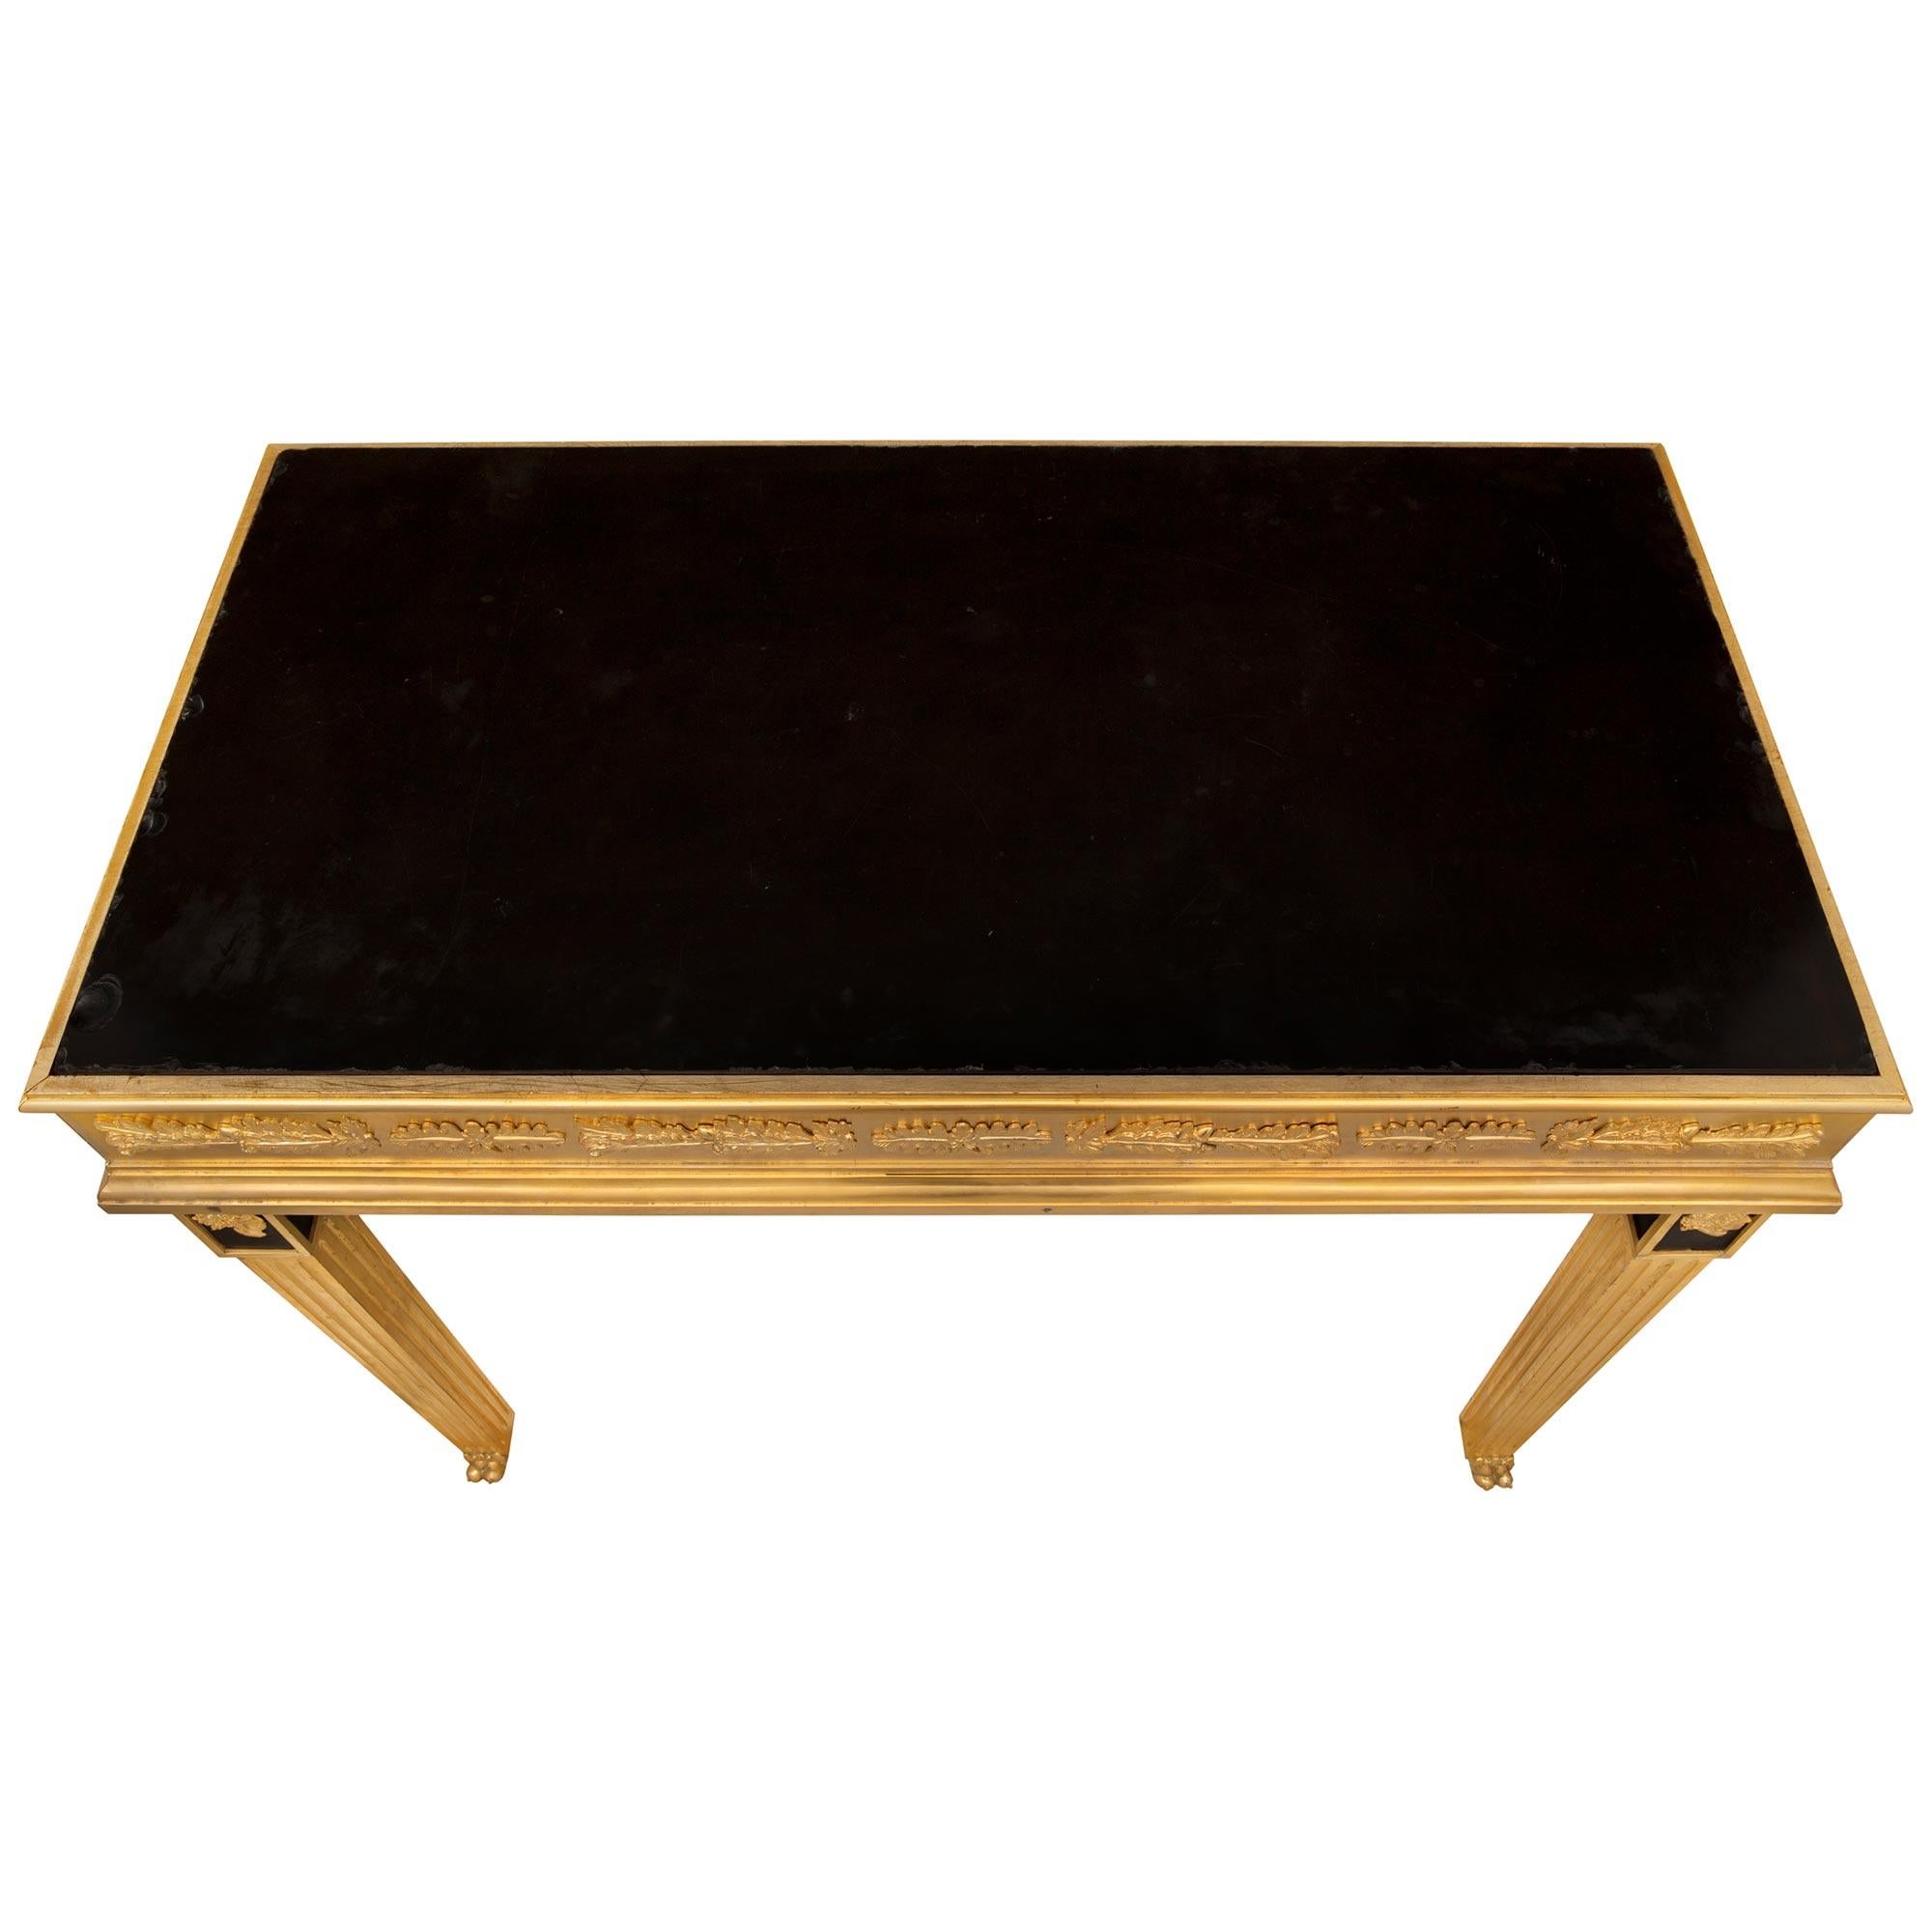 A stunning and extremely high quality Italian 19th century Neo-Classical st. ormolu and black Belgian marble center table. The rectangular shaped table is raised by handsome square tapered fluted legs with impressive paw feet and richly chased masks